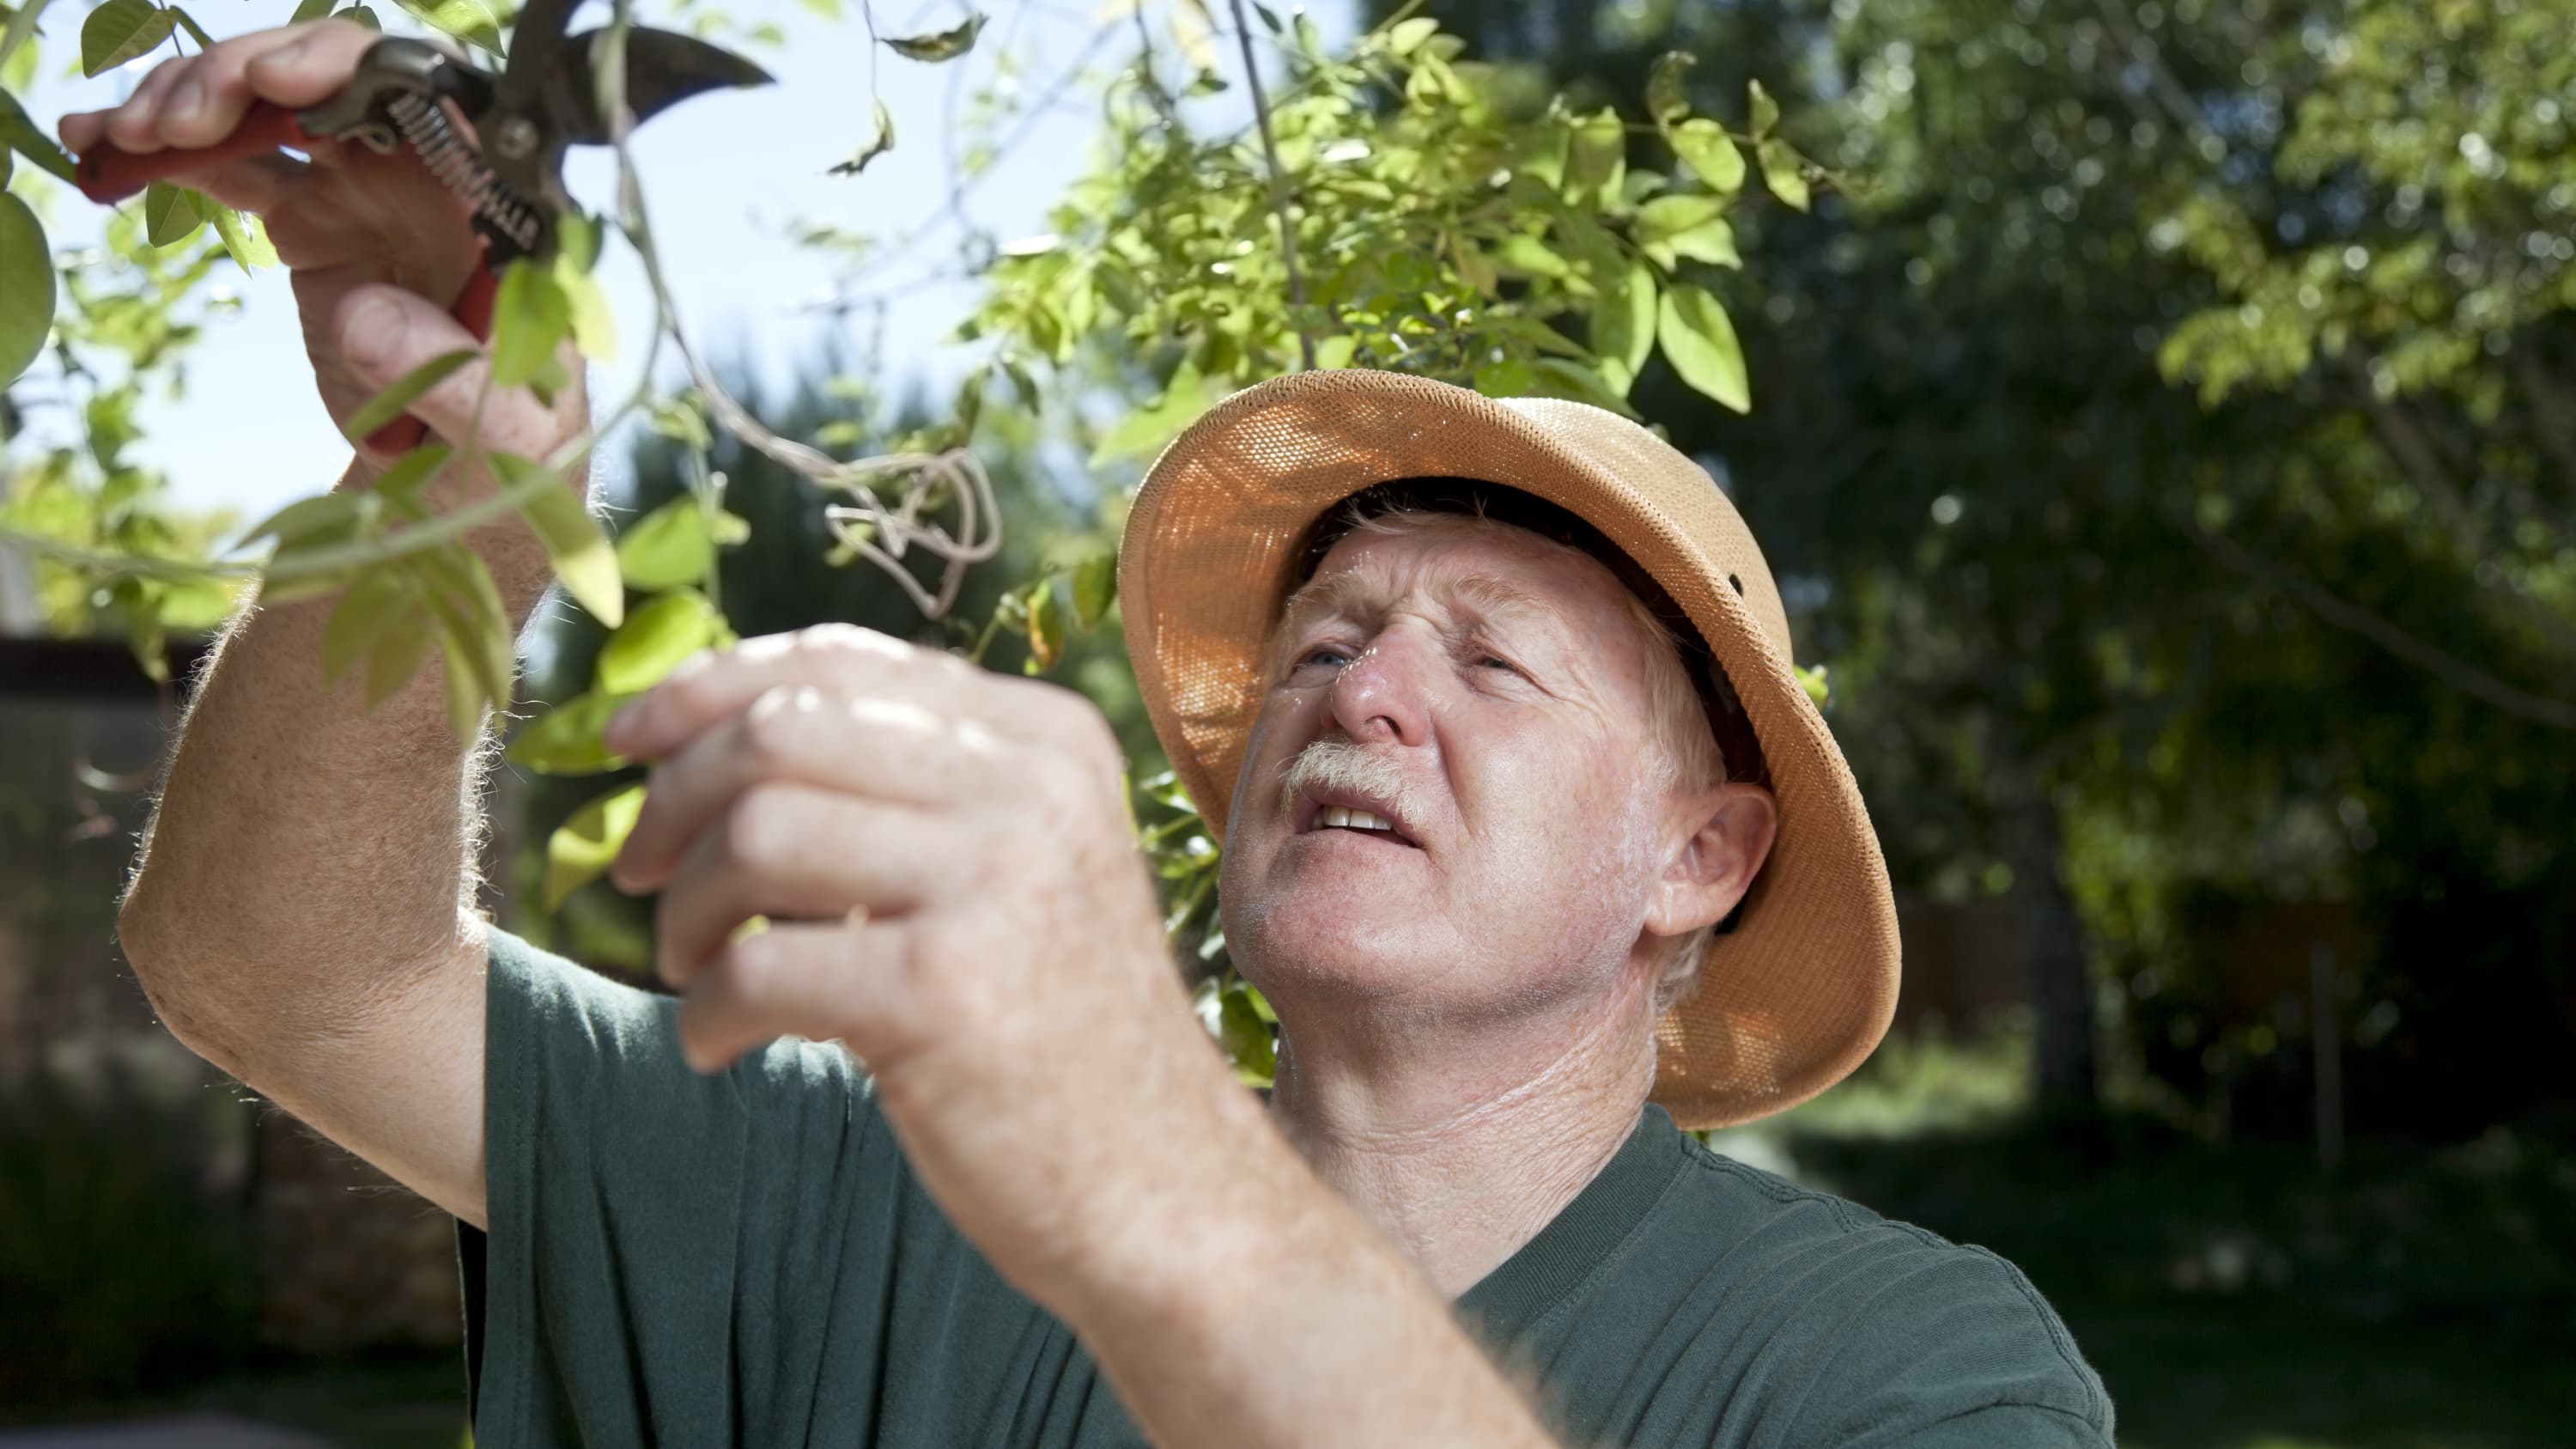 a man wears a hat while gardening to protect himself from basal cell carcinoma